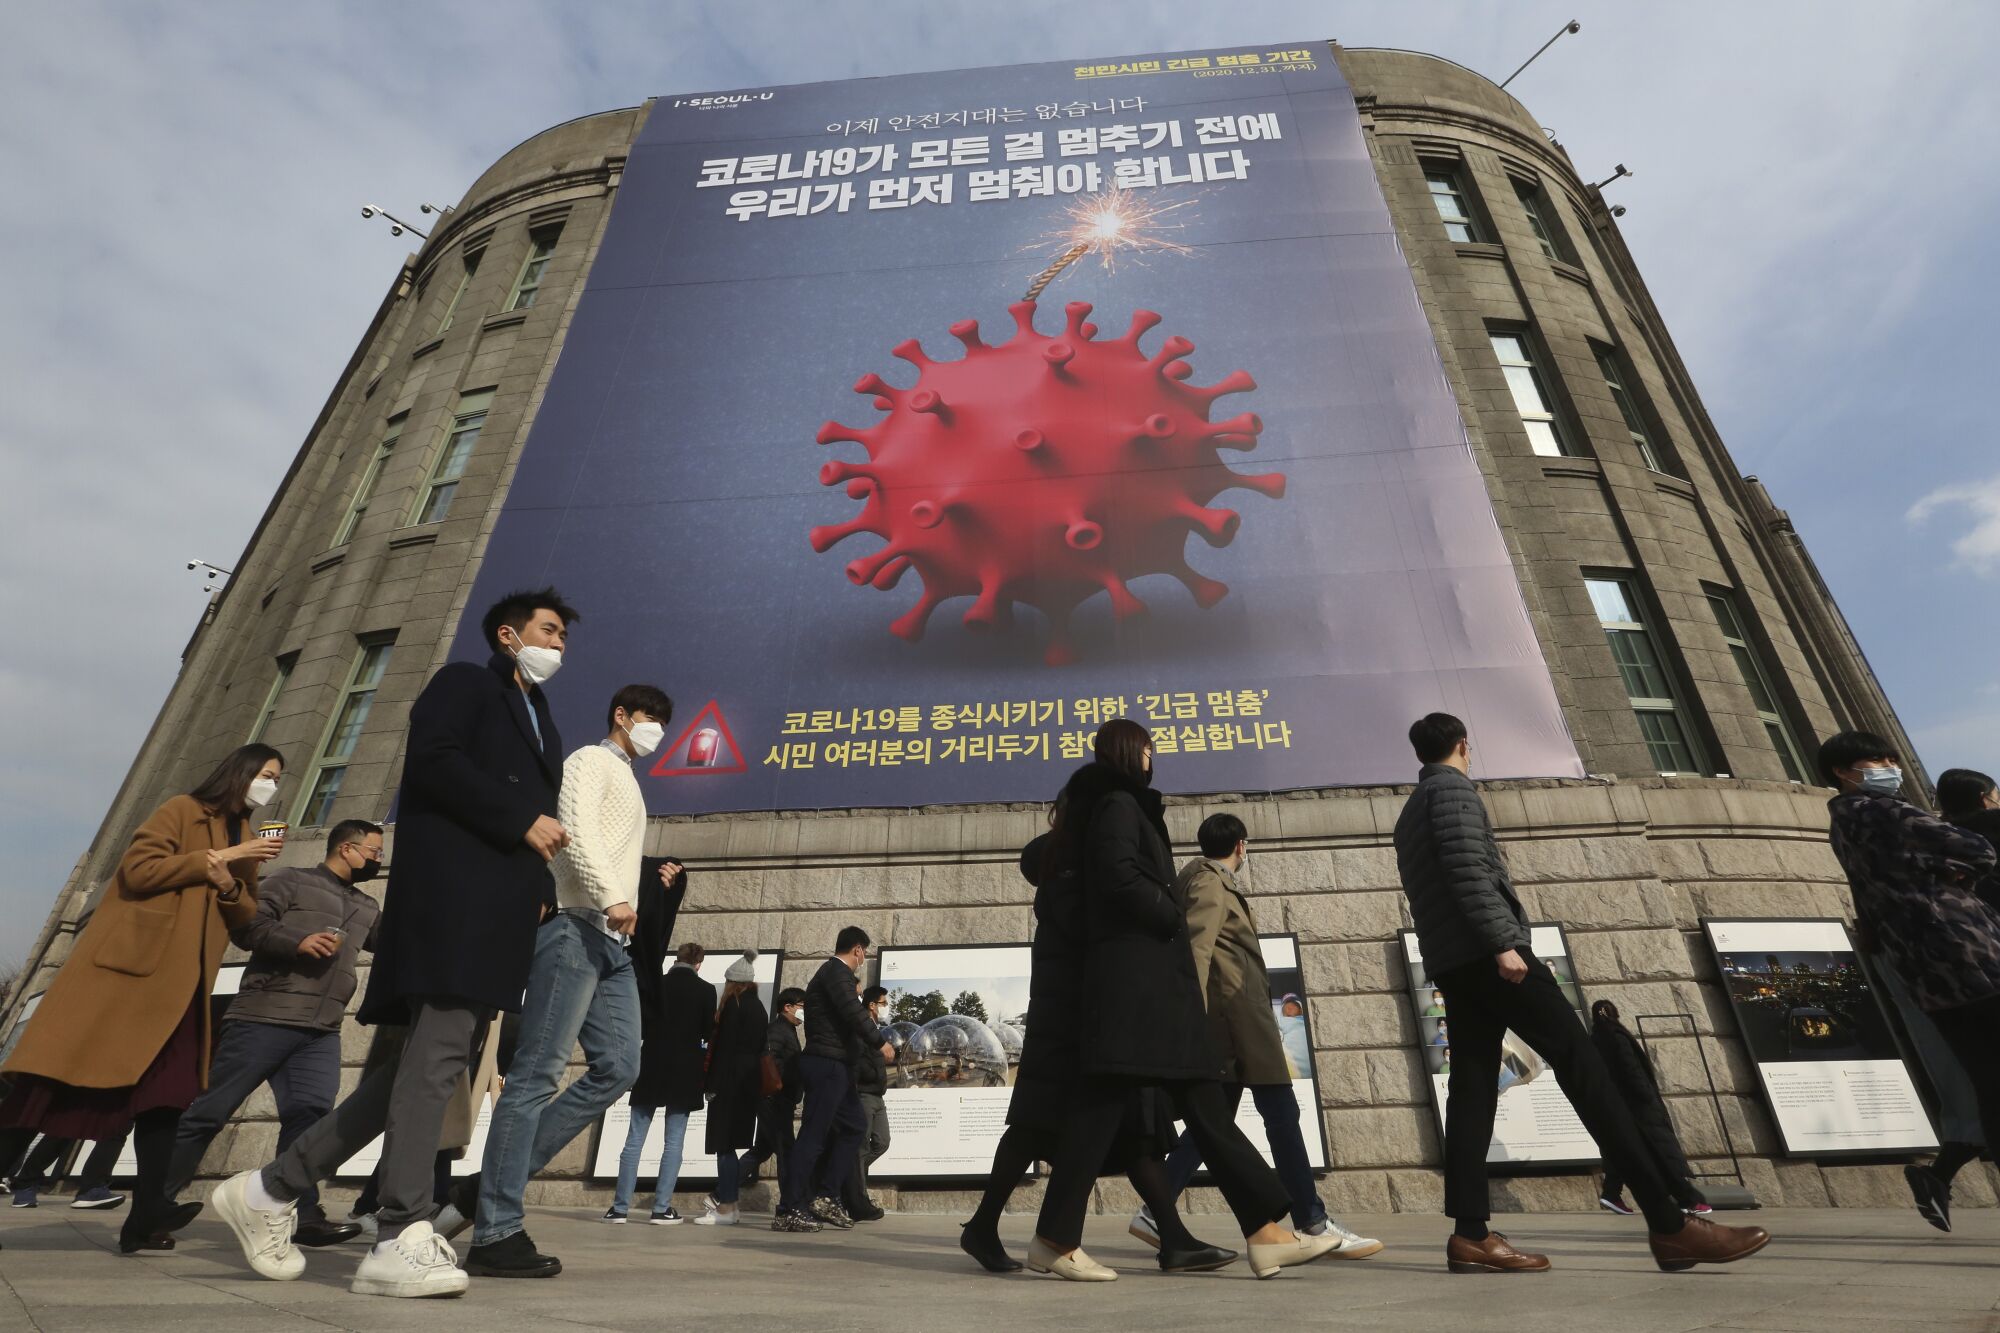 People wearing face masks walk past a coronavirus safety banner ad advising an enhanced social distancing campaign in Seoul.